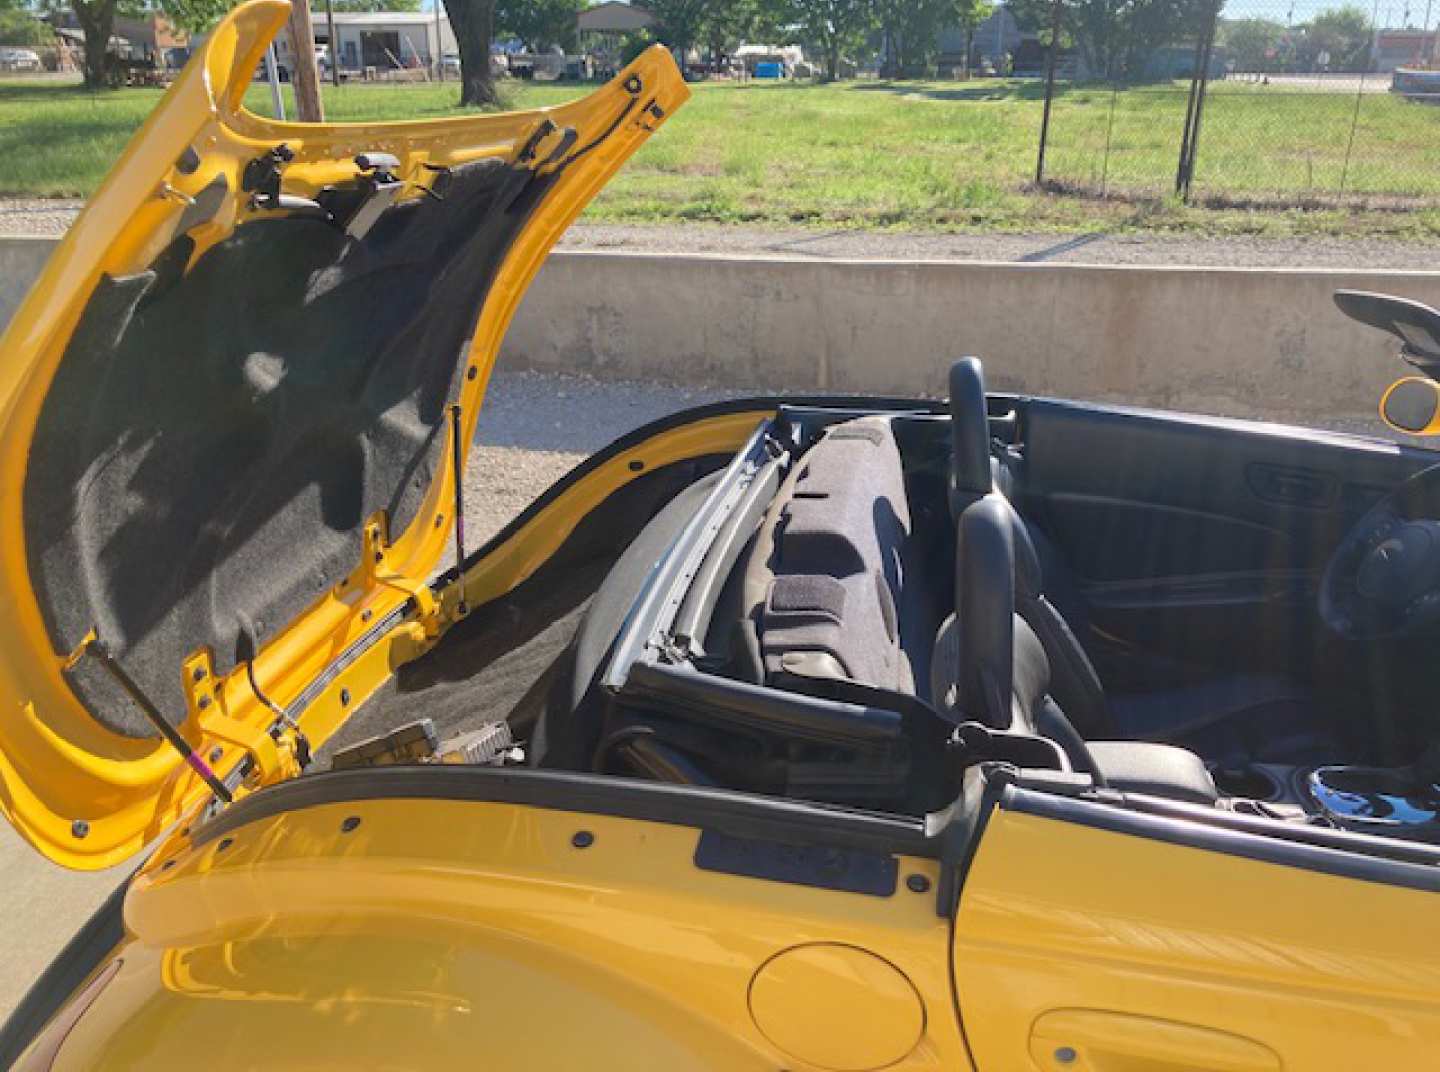 3rd Image of a 2000 PLYMOUTH PROWLER